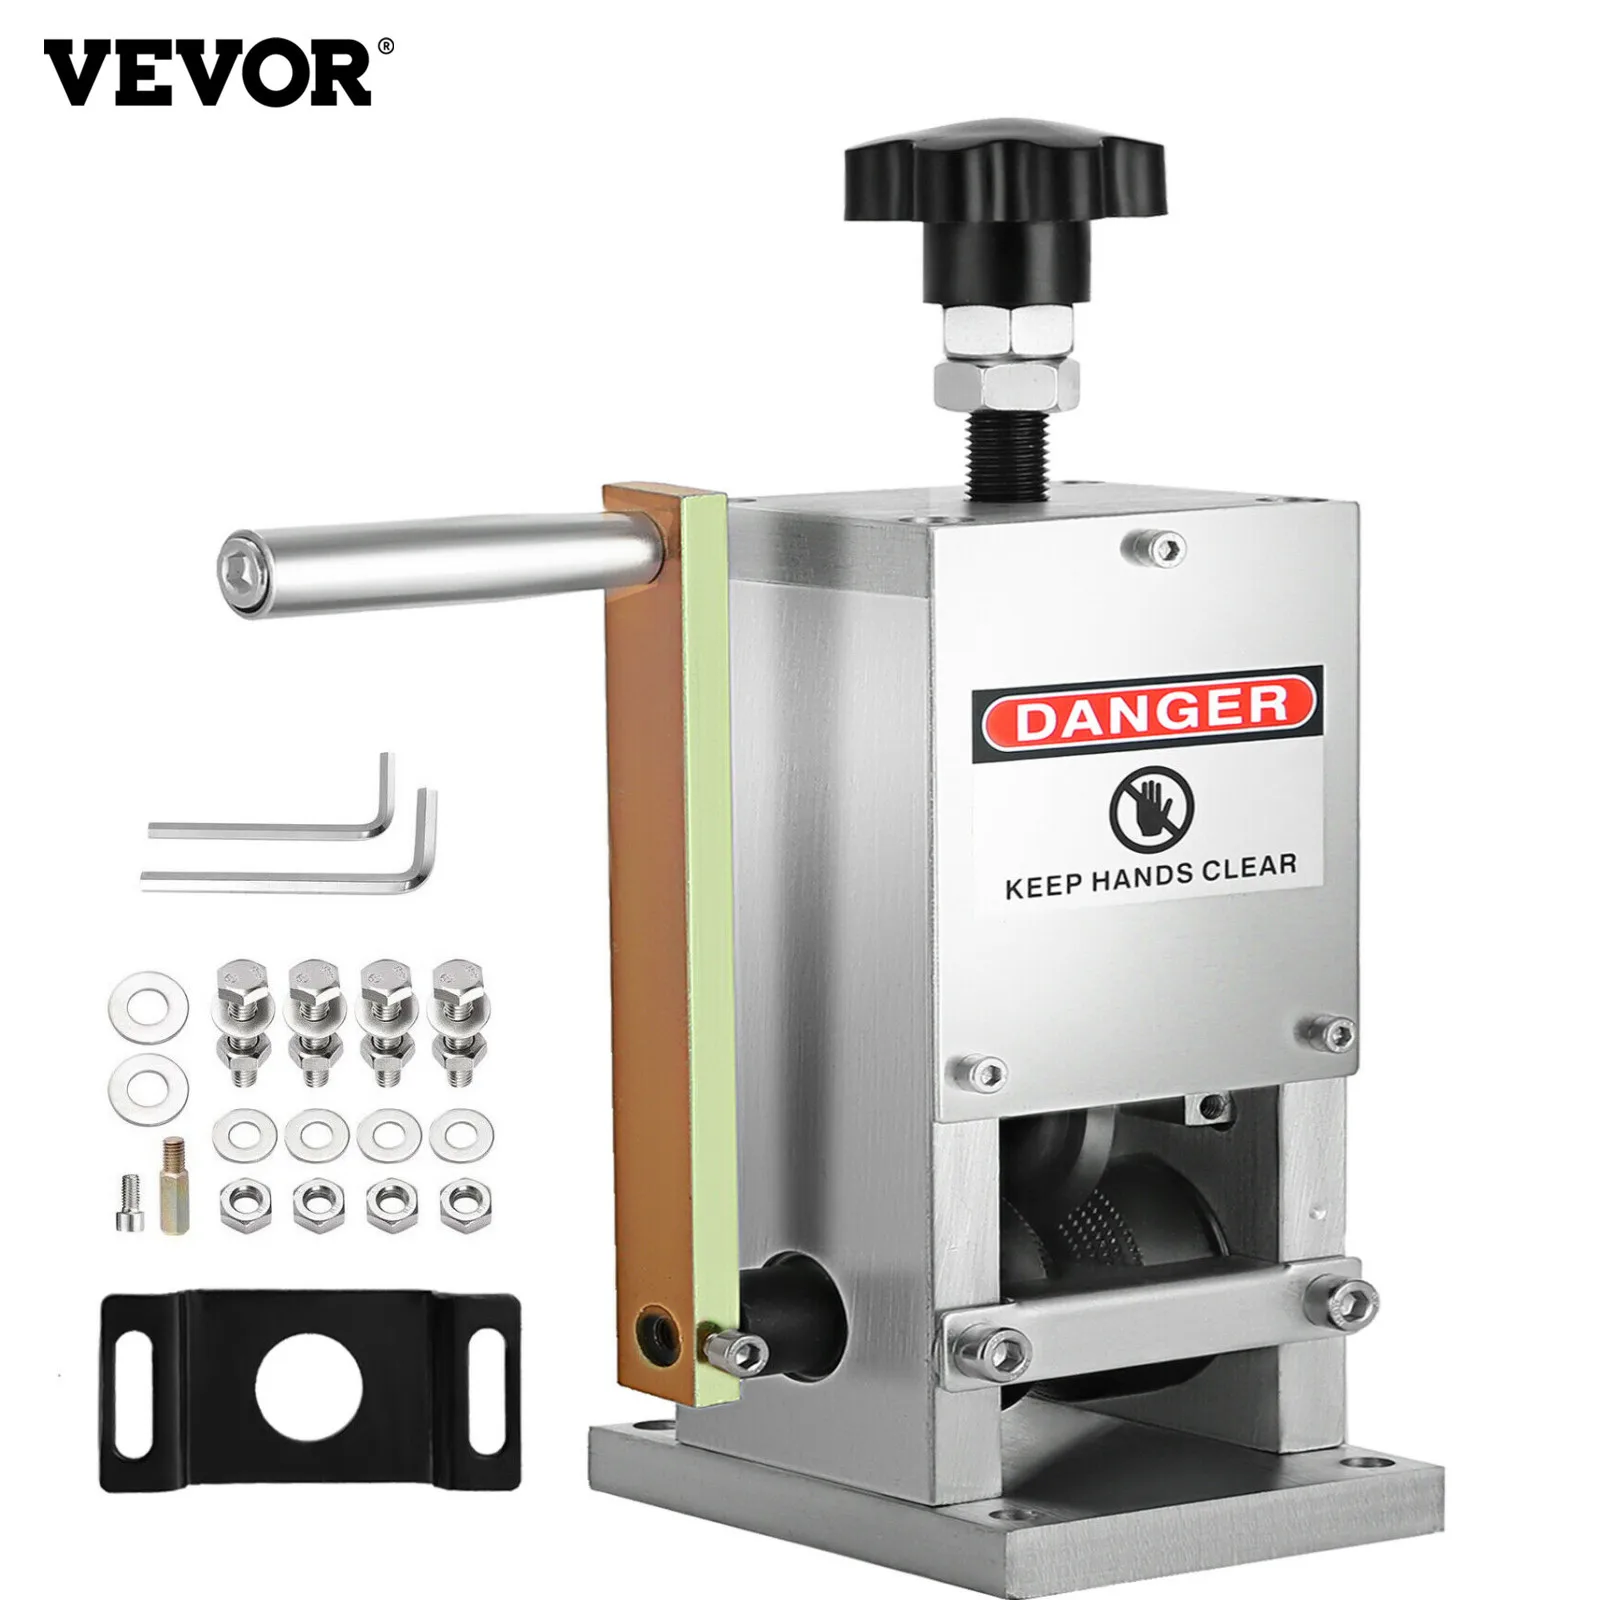 VEVOR Portable Wire Stripping Machine Hand Crank Cable Stripper For metal Wire Recycle Wire Cable Stripper Stripping1.5-25mm